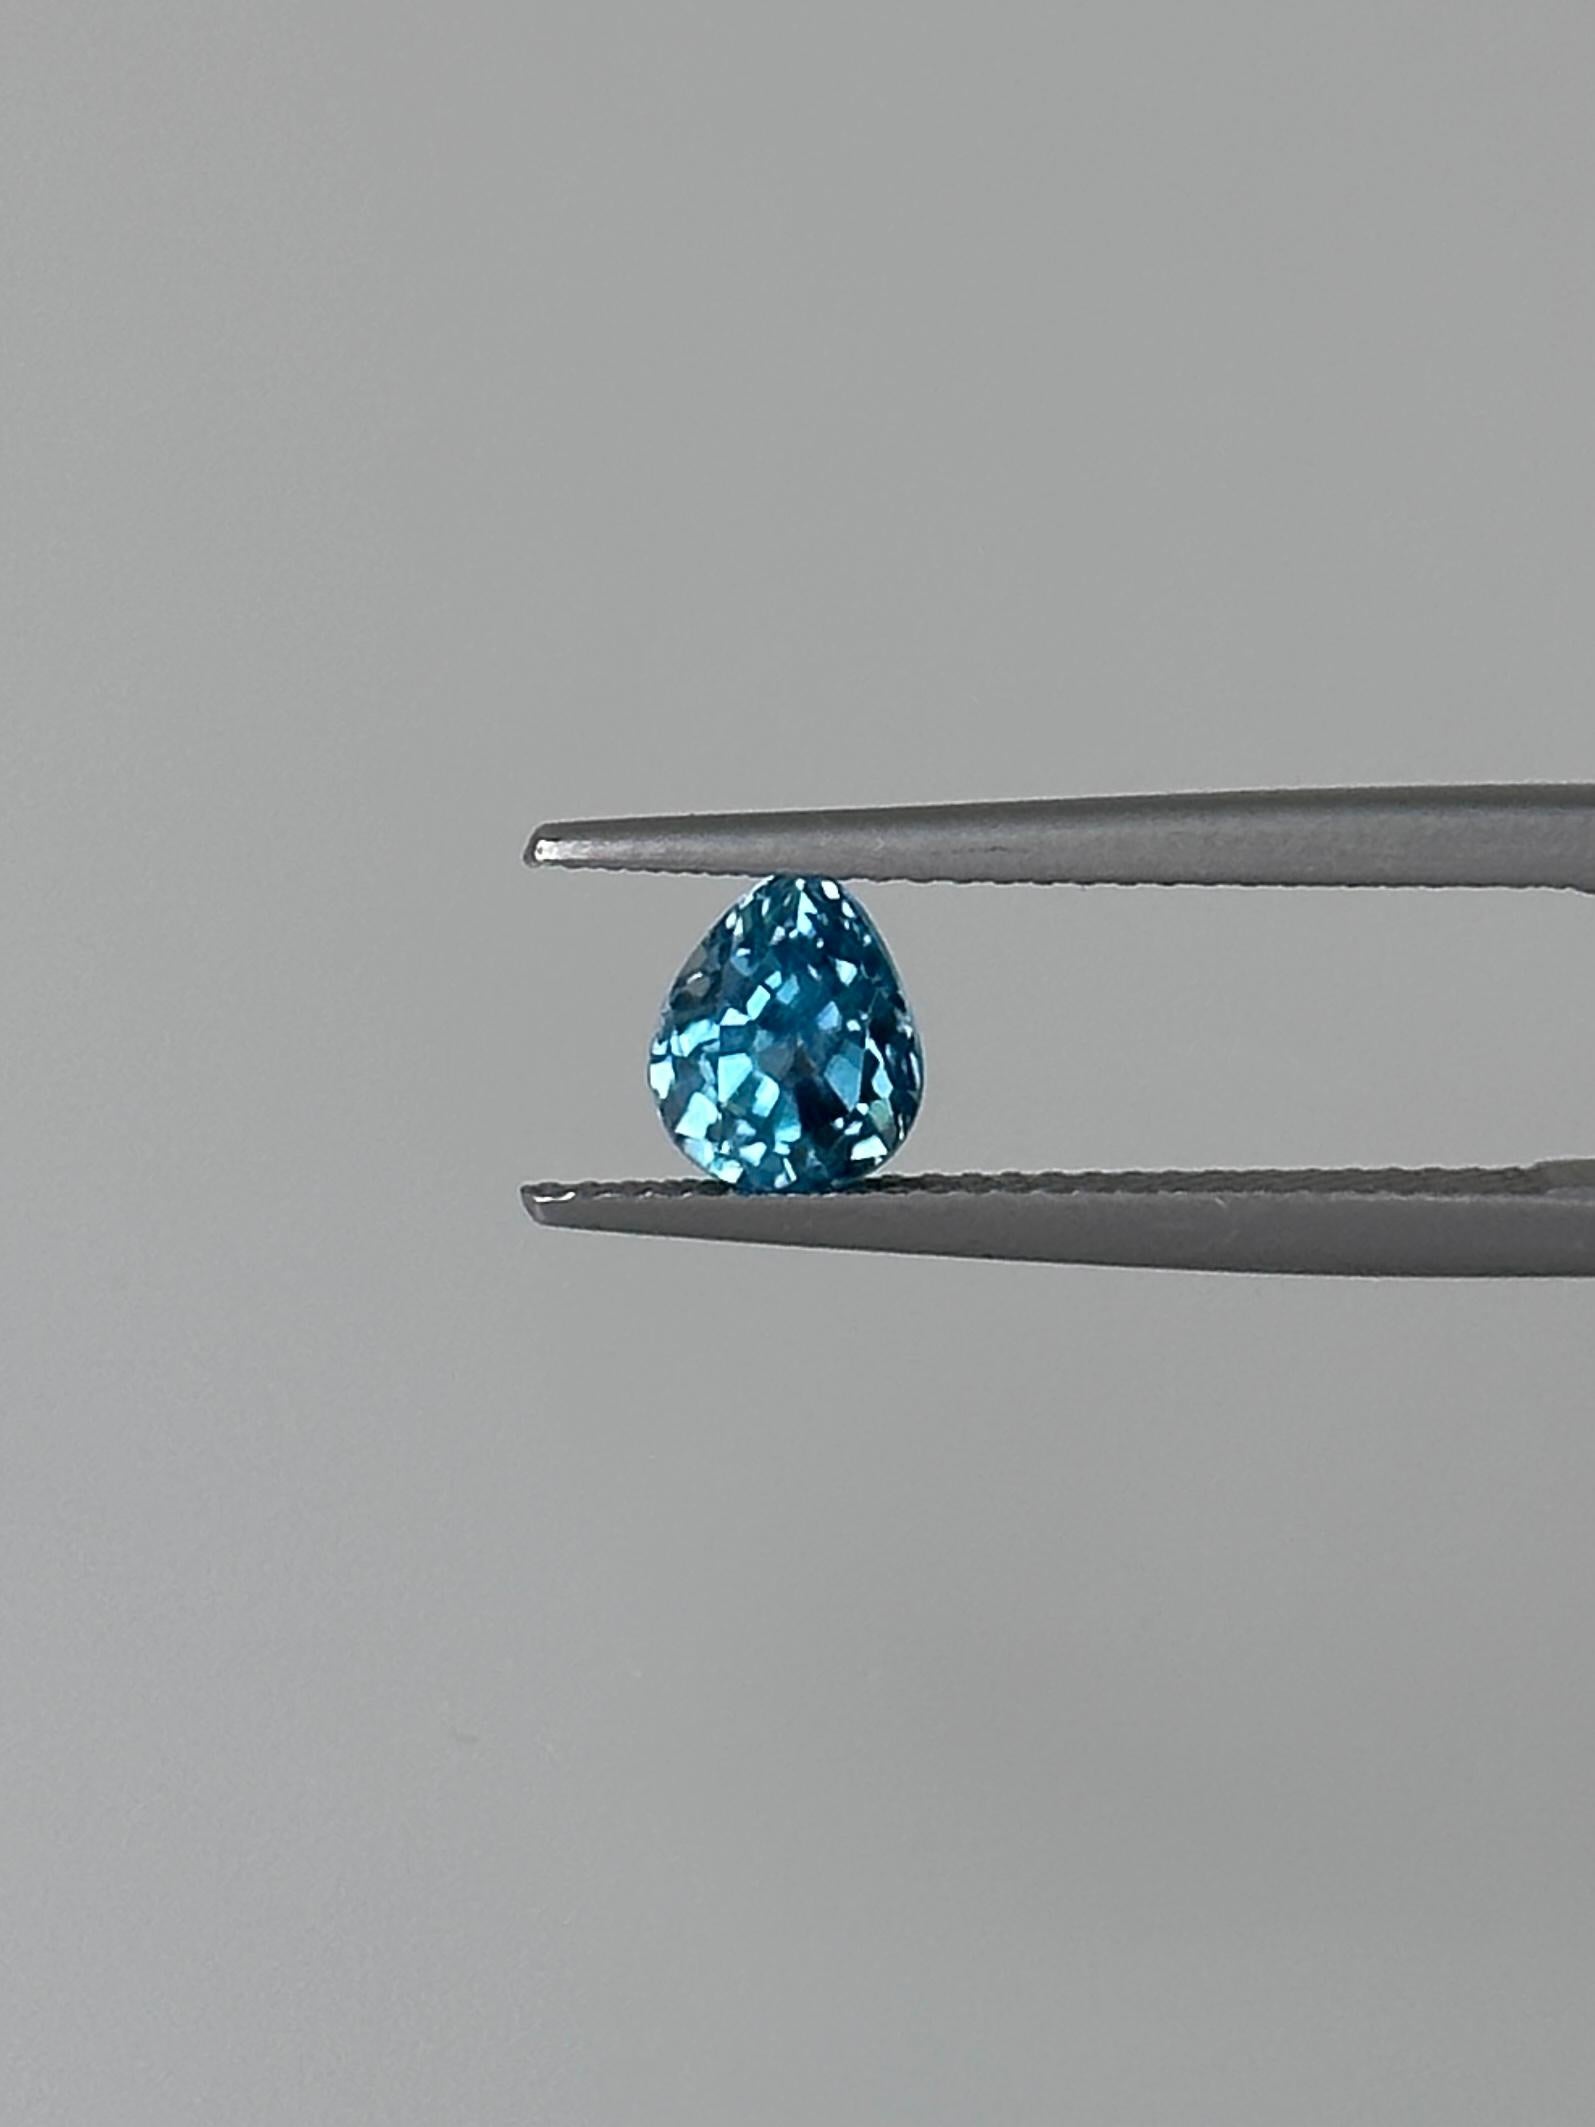 A beautiful sparkling Pear shaped 'Metallic Blue' Zircon from Ratanakiri, Cambodia.

Dimension: 6.63 x 5.53 x 4.58 mm
Traditional Heat Treatment

Rare sparkling Blue Zircon is only found at one place in the world at Ratanakiri province in Northeast